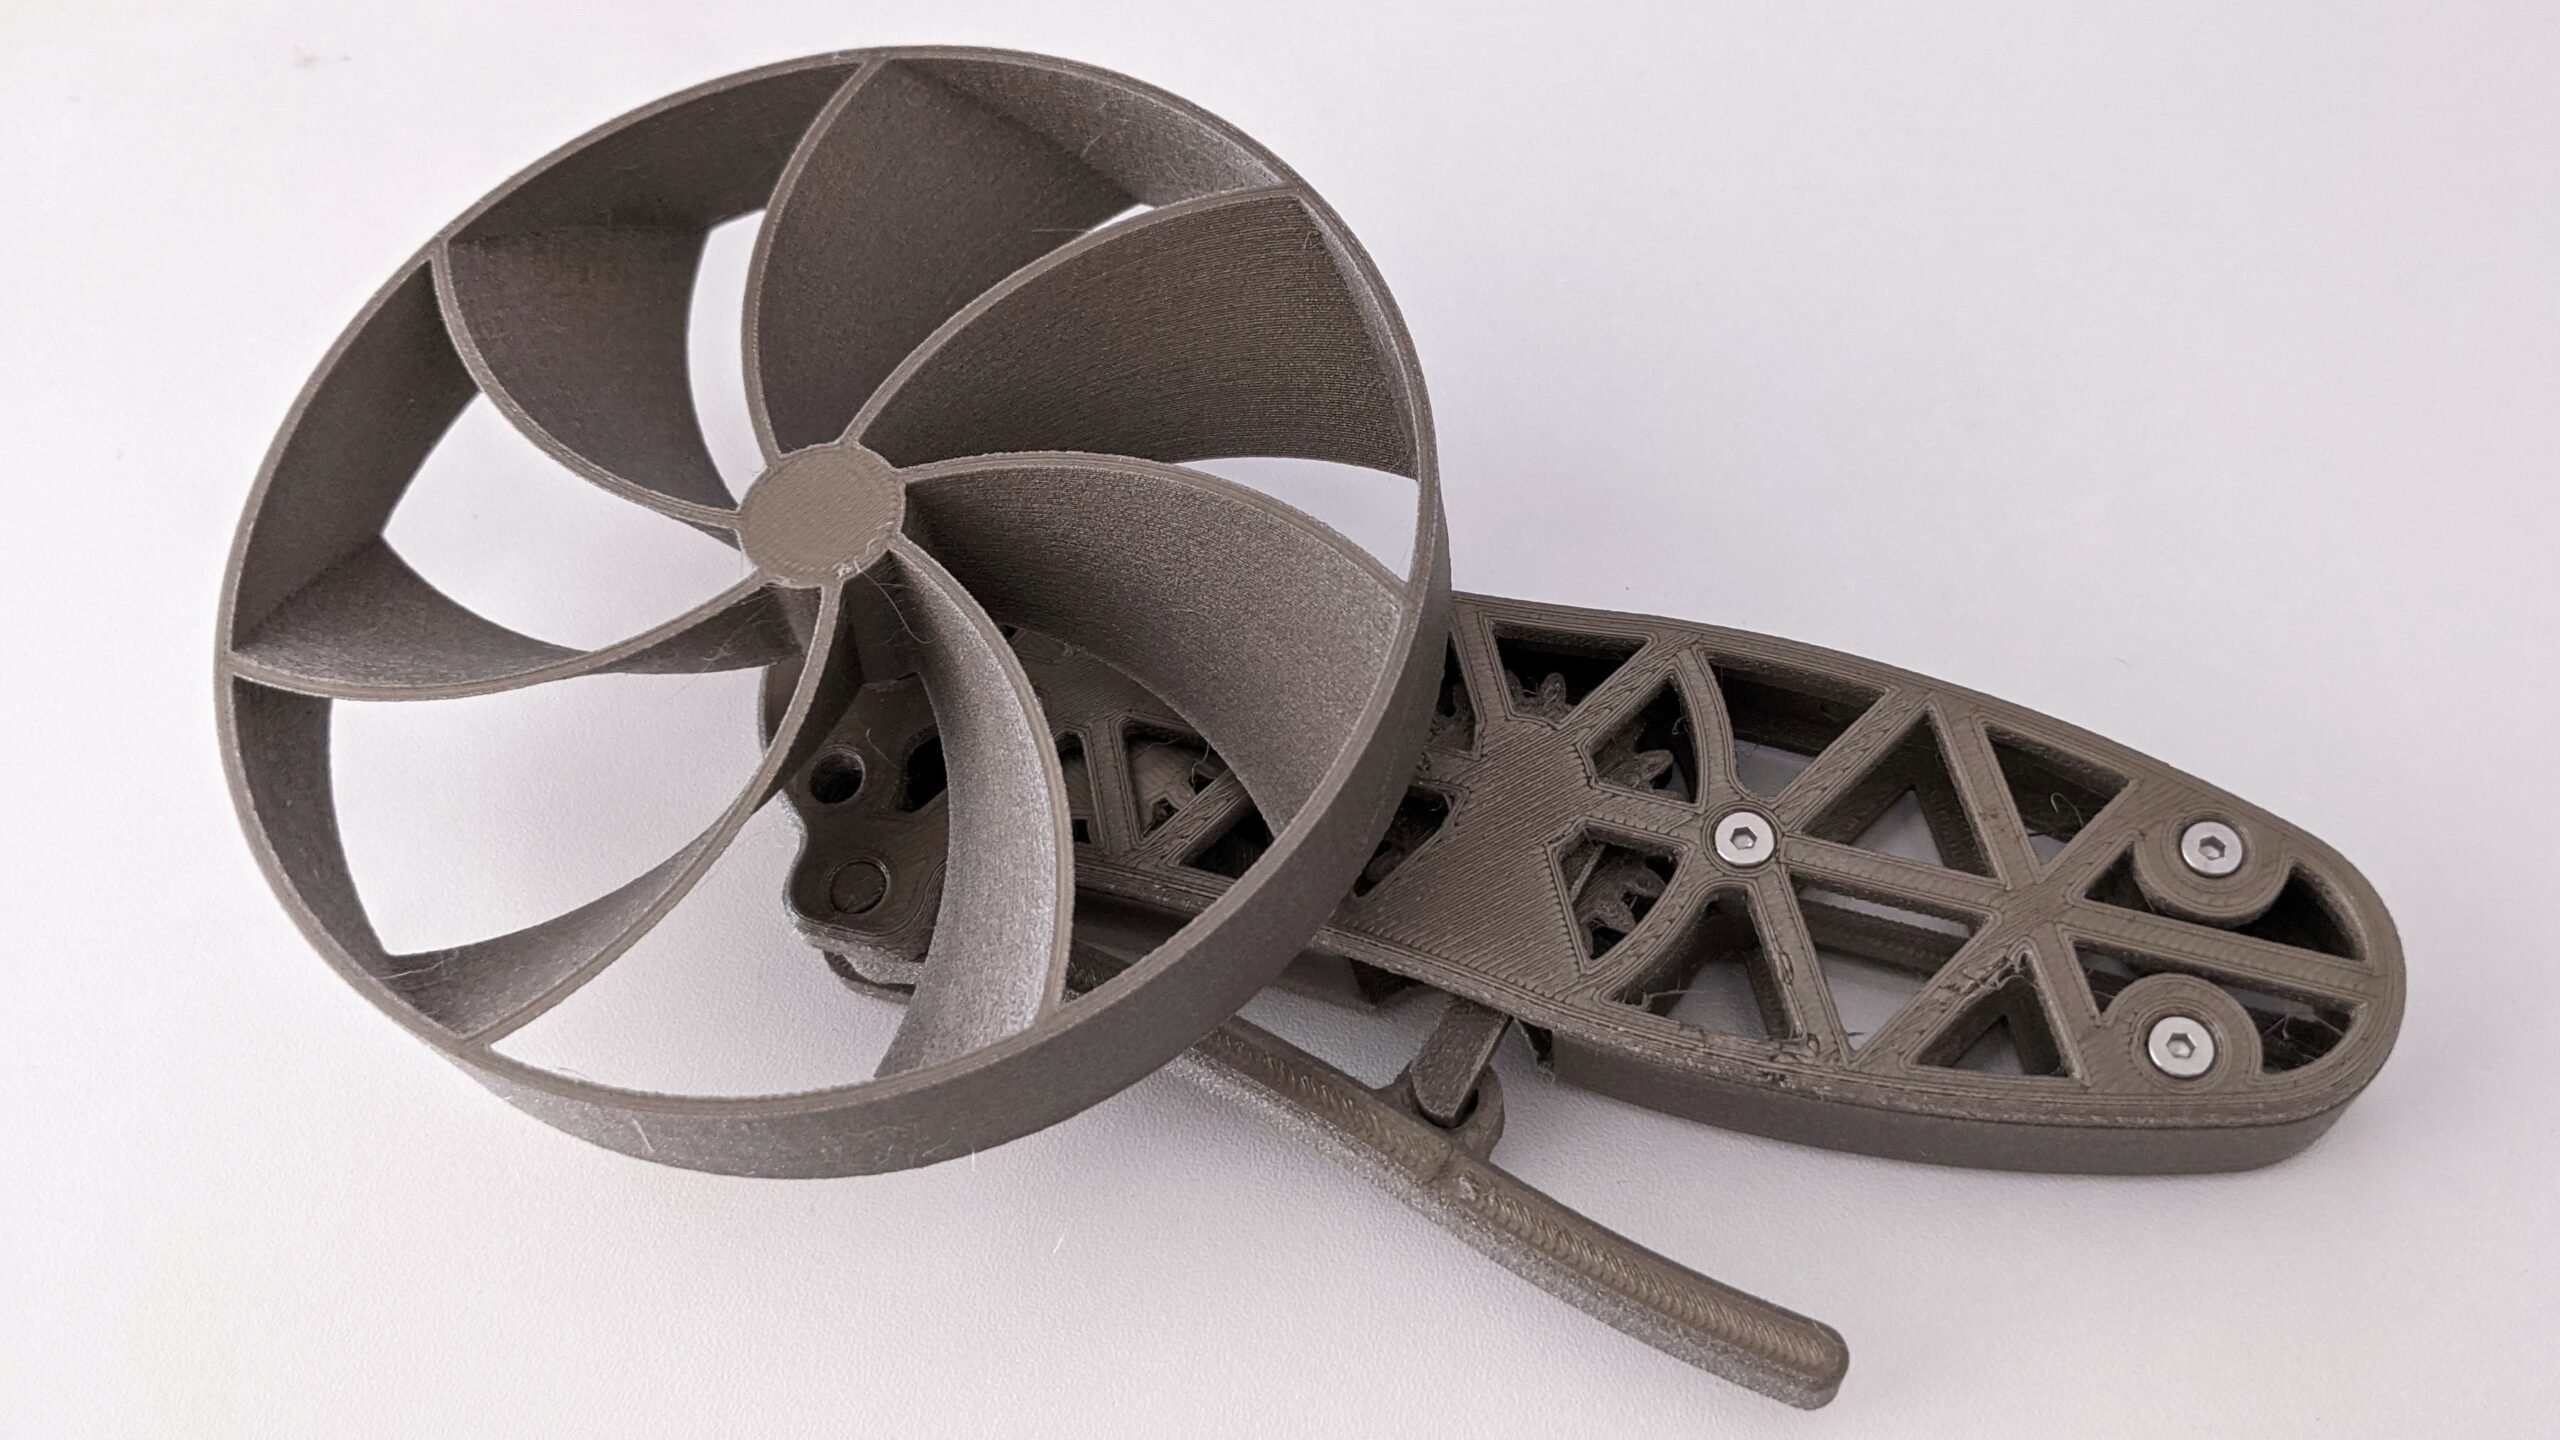 40 Useful 3D Printed Gadgets to Make Life Easier